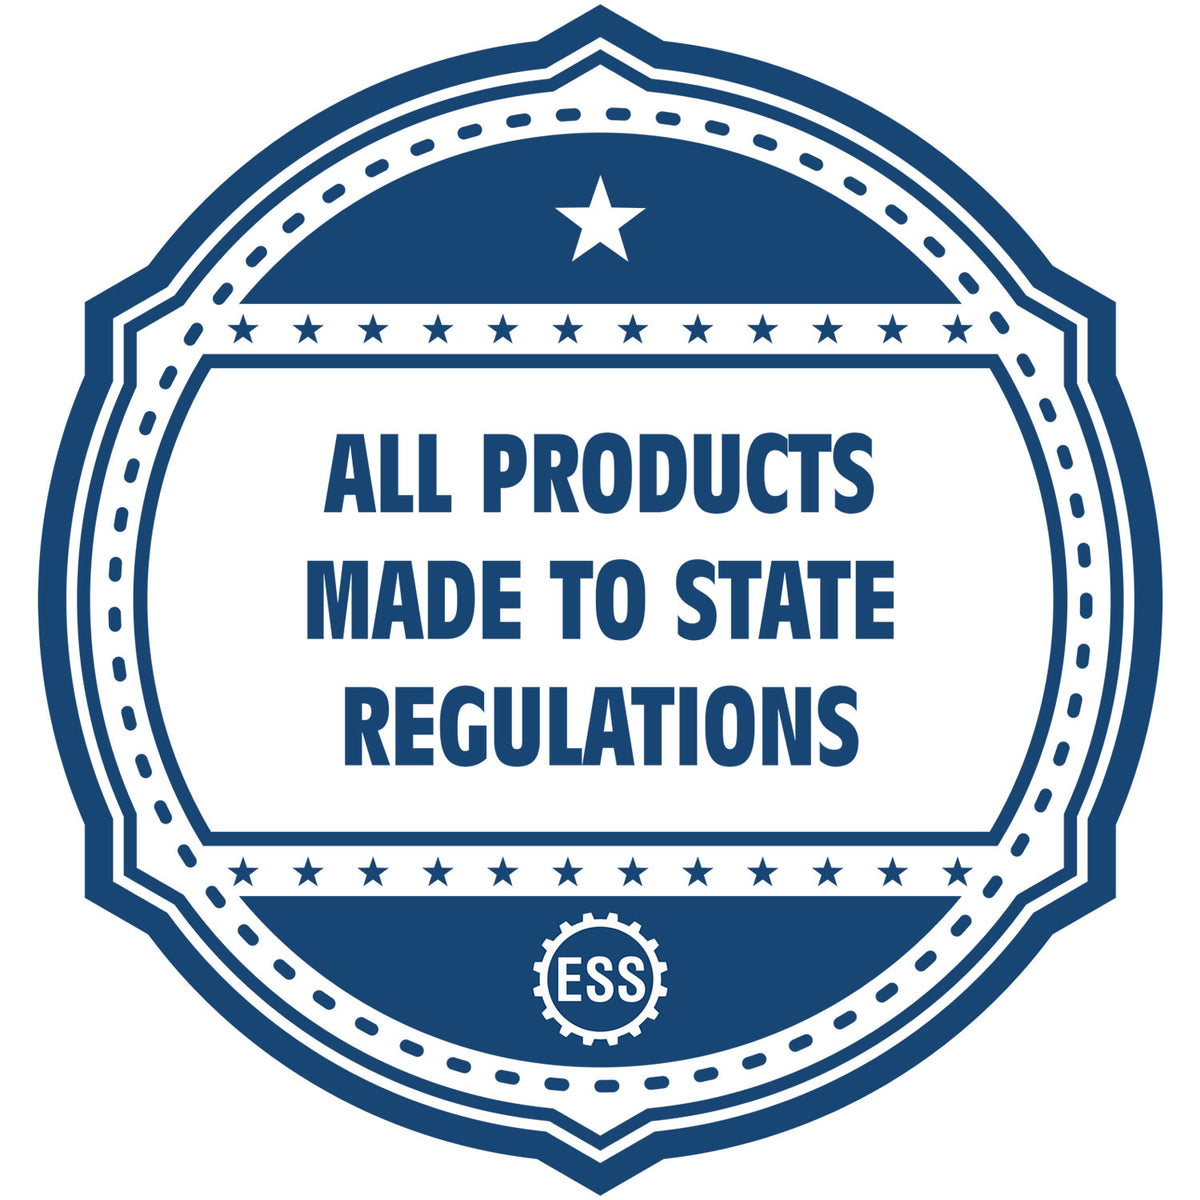 An icon or badge element for the Long Reach West Virginia PE Seal showing that this product is made in compliance with state regulations.